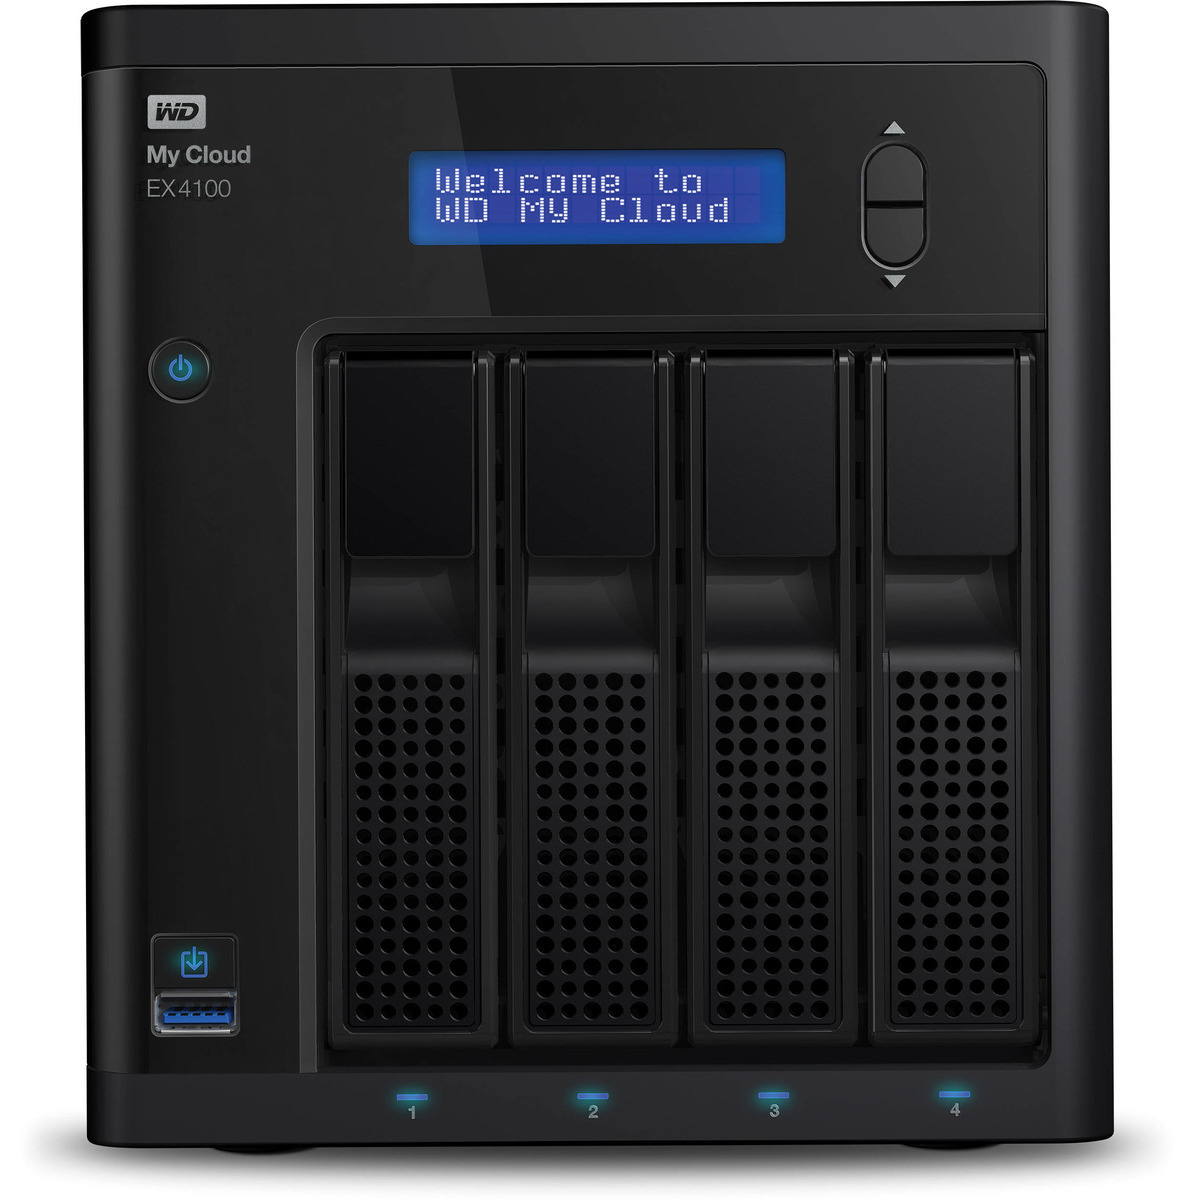 Western Digital My Cloud EX4100 Desktop 4-Bay Personal / Basic Home / Small Office NAS - Network Attached Storage Device Burn-In Tested Configurations My Cloud EX4100